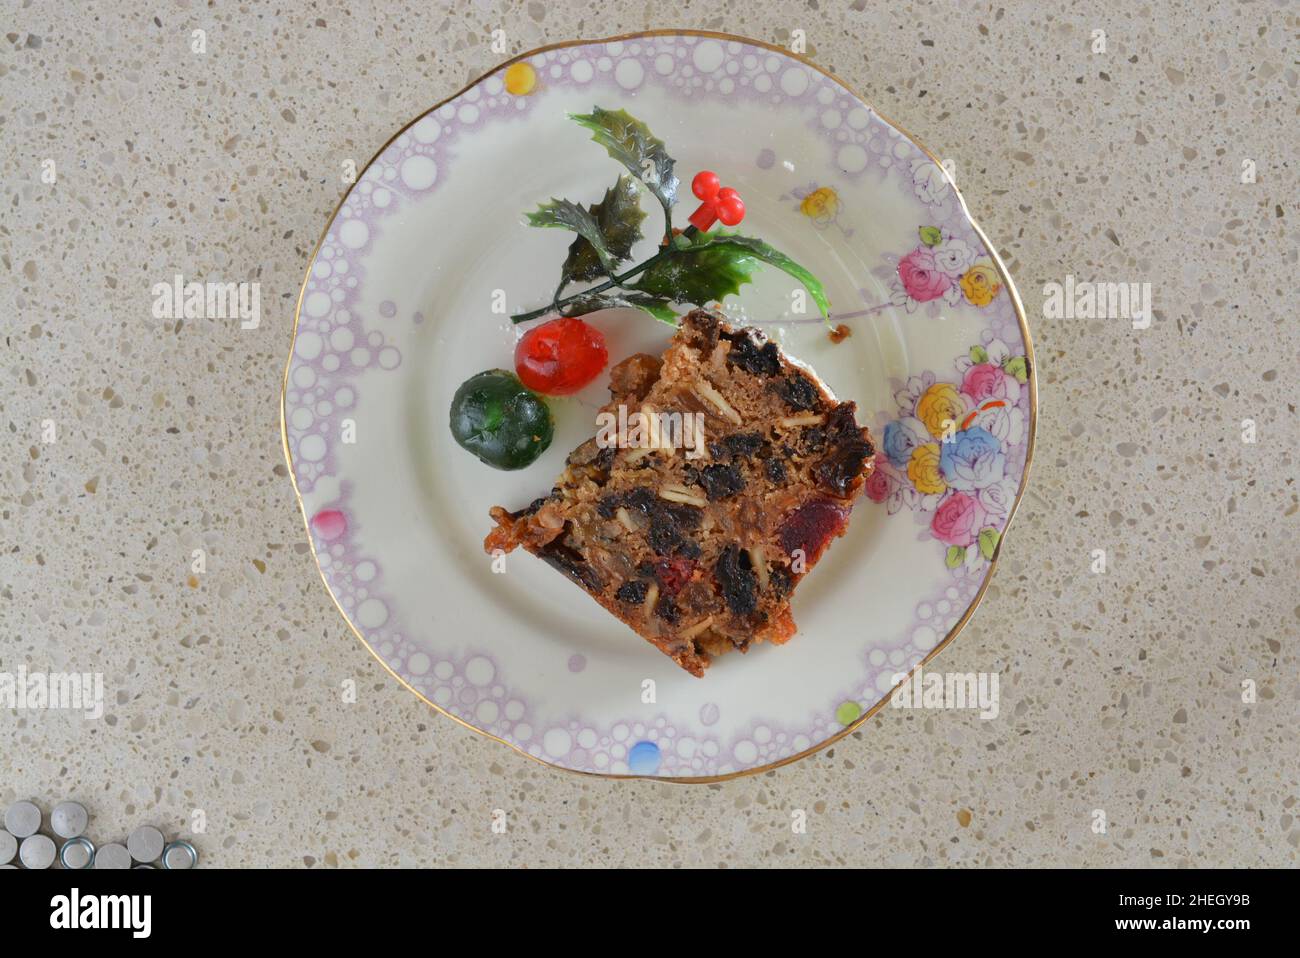 Christmas Cake Slice with cherry and Holly trim on floral cake plate. Decorations in front of cake slice. Stock Photo